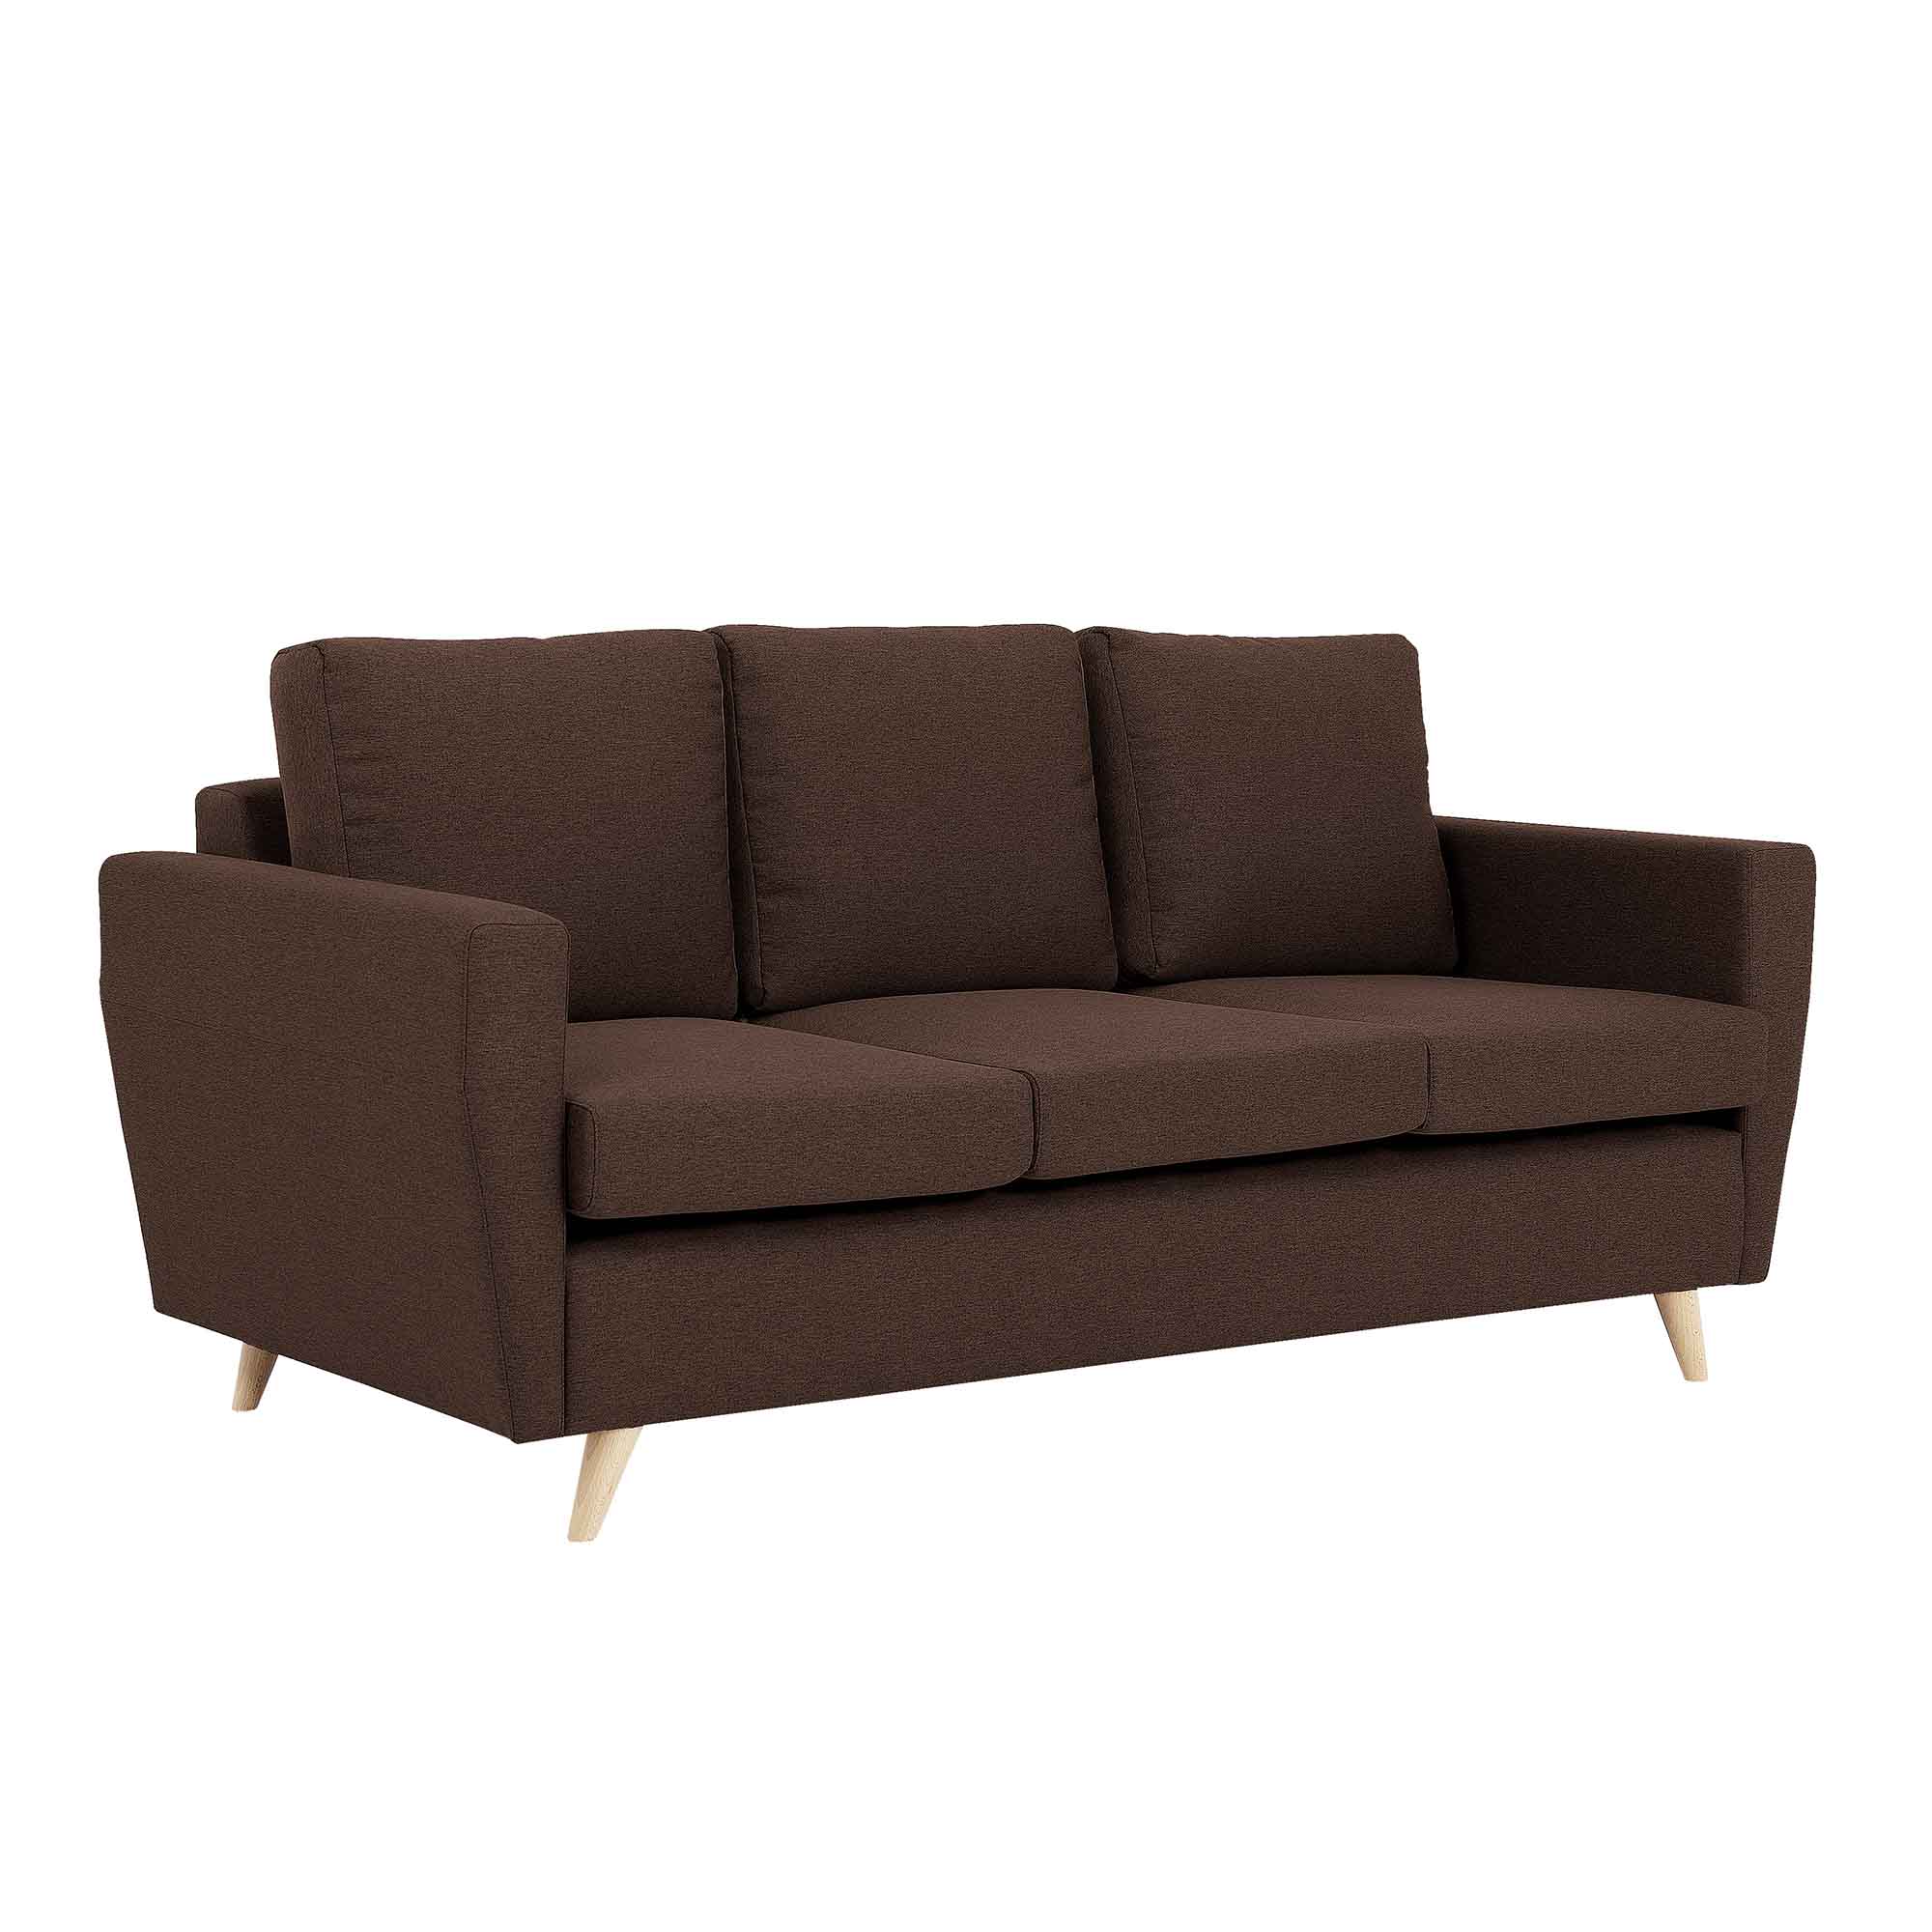 LOVER Sofa 3 Seater upholstery colour brown-white background